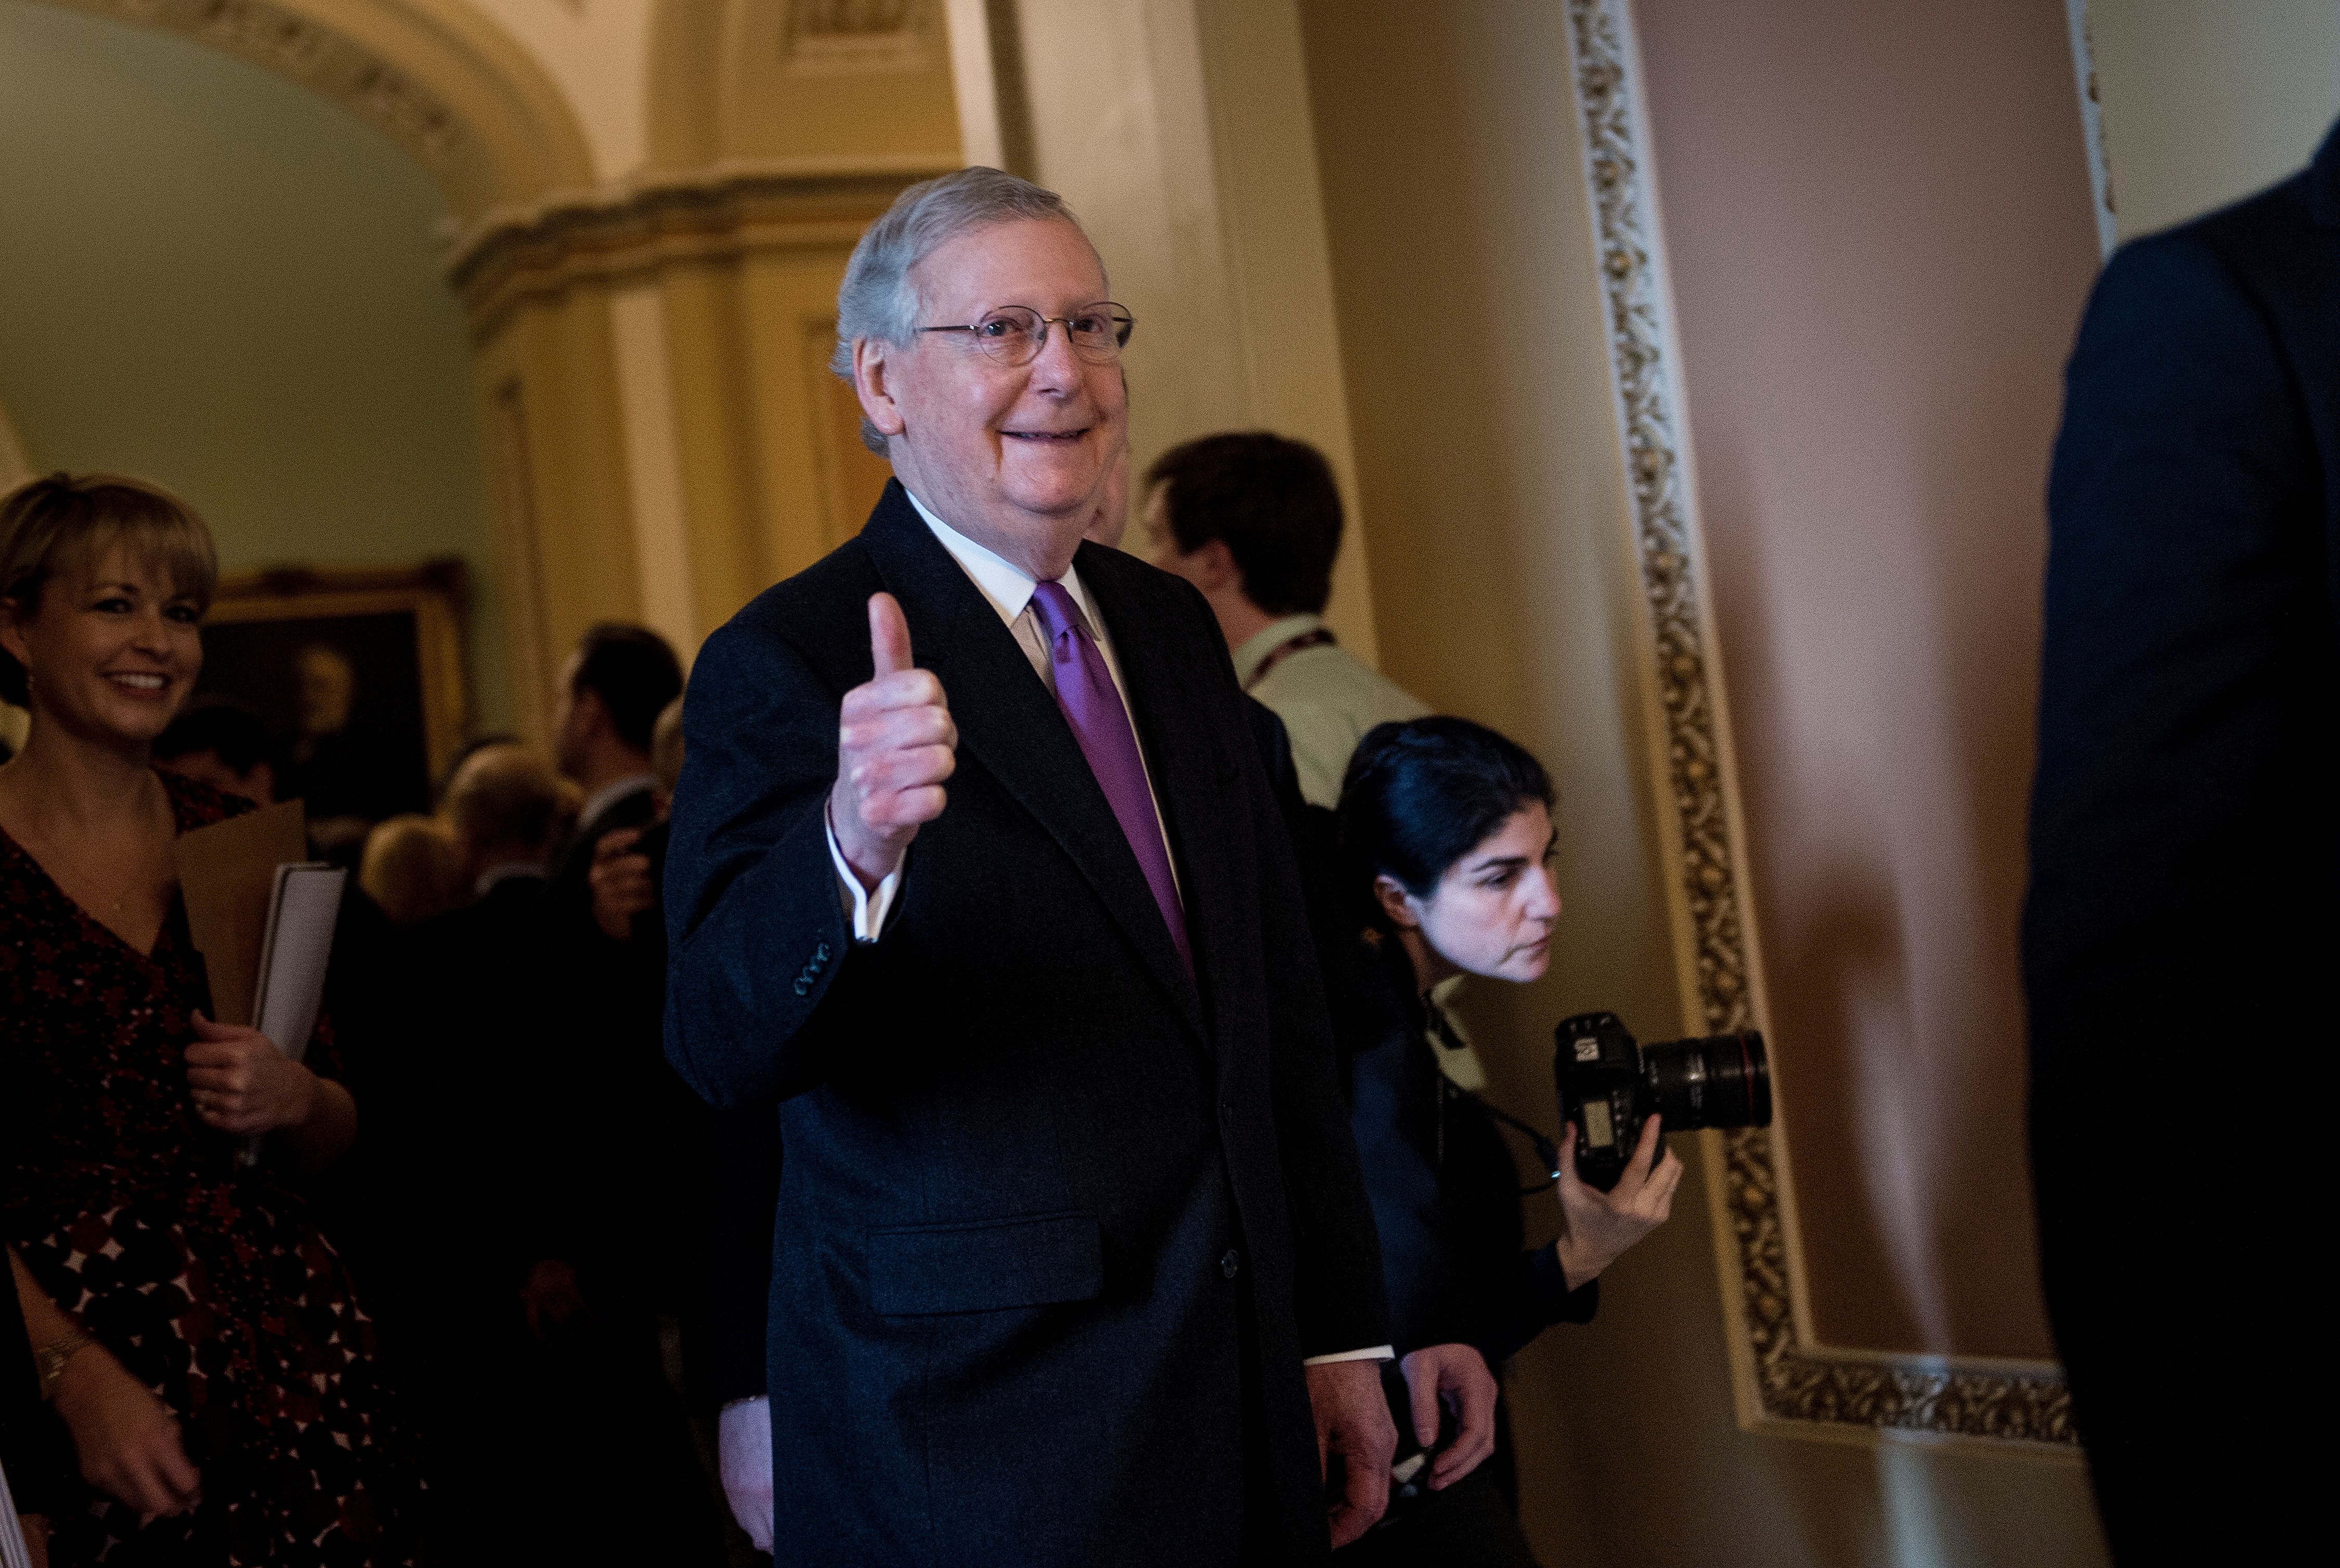 Mitch McConnell gives a thumbs up after a vote on Capitol Hill